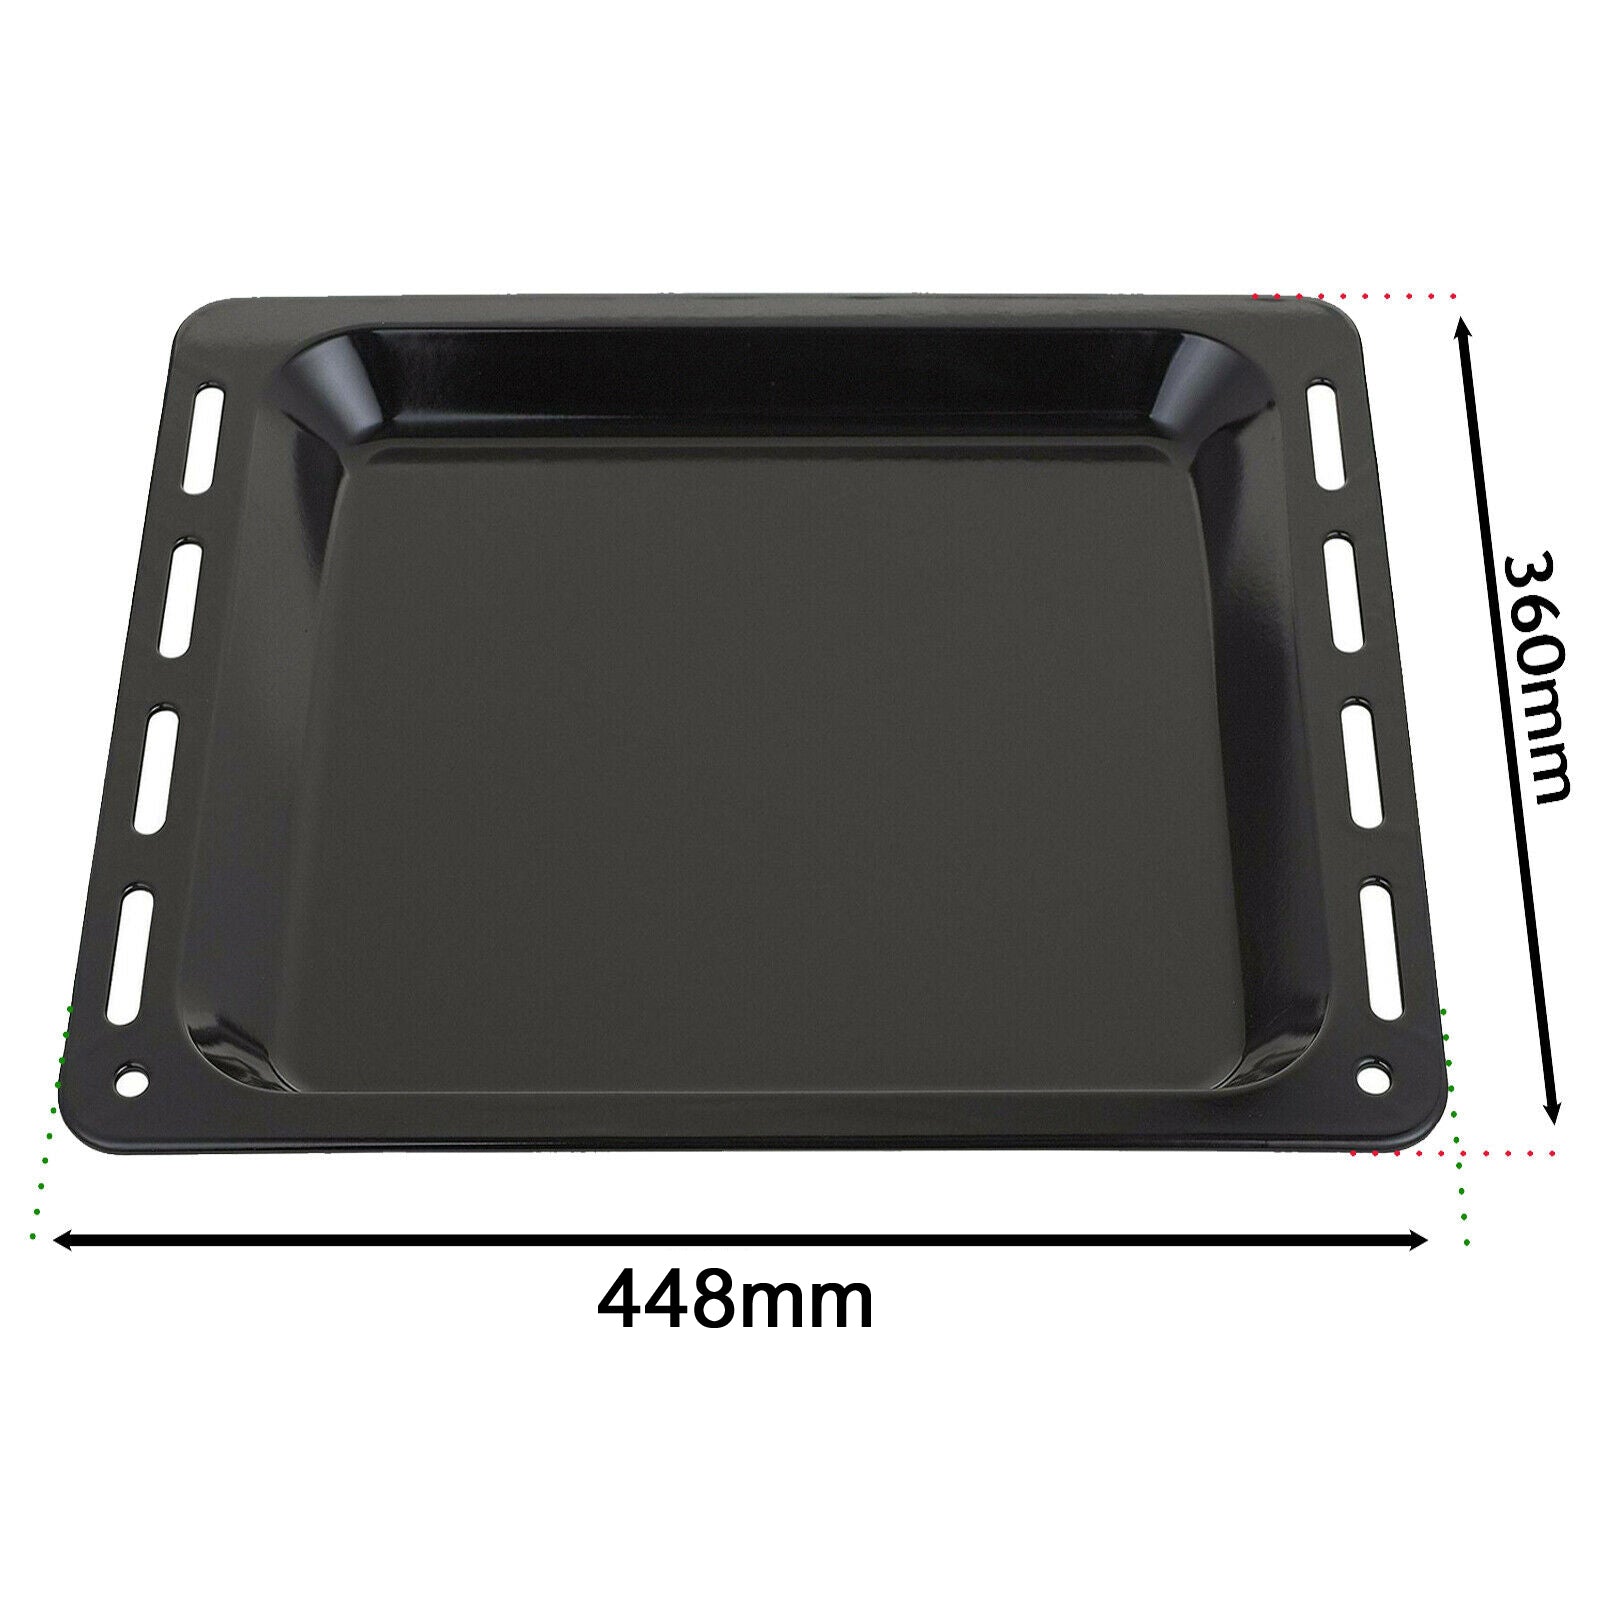 Baking Tray Enamelled Pan for Bosch Oven Cooker (448mm x 360mm x 25mm, Pack of 2)